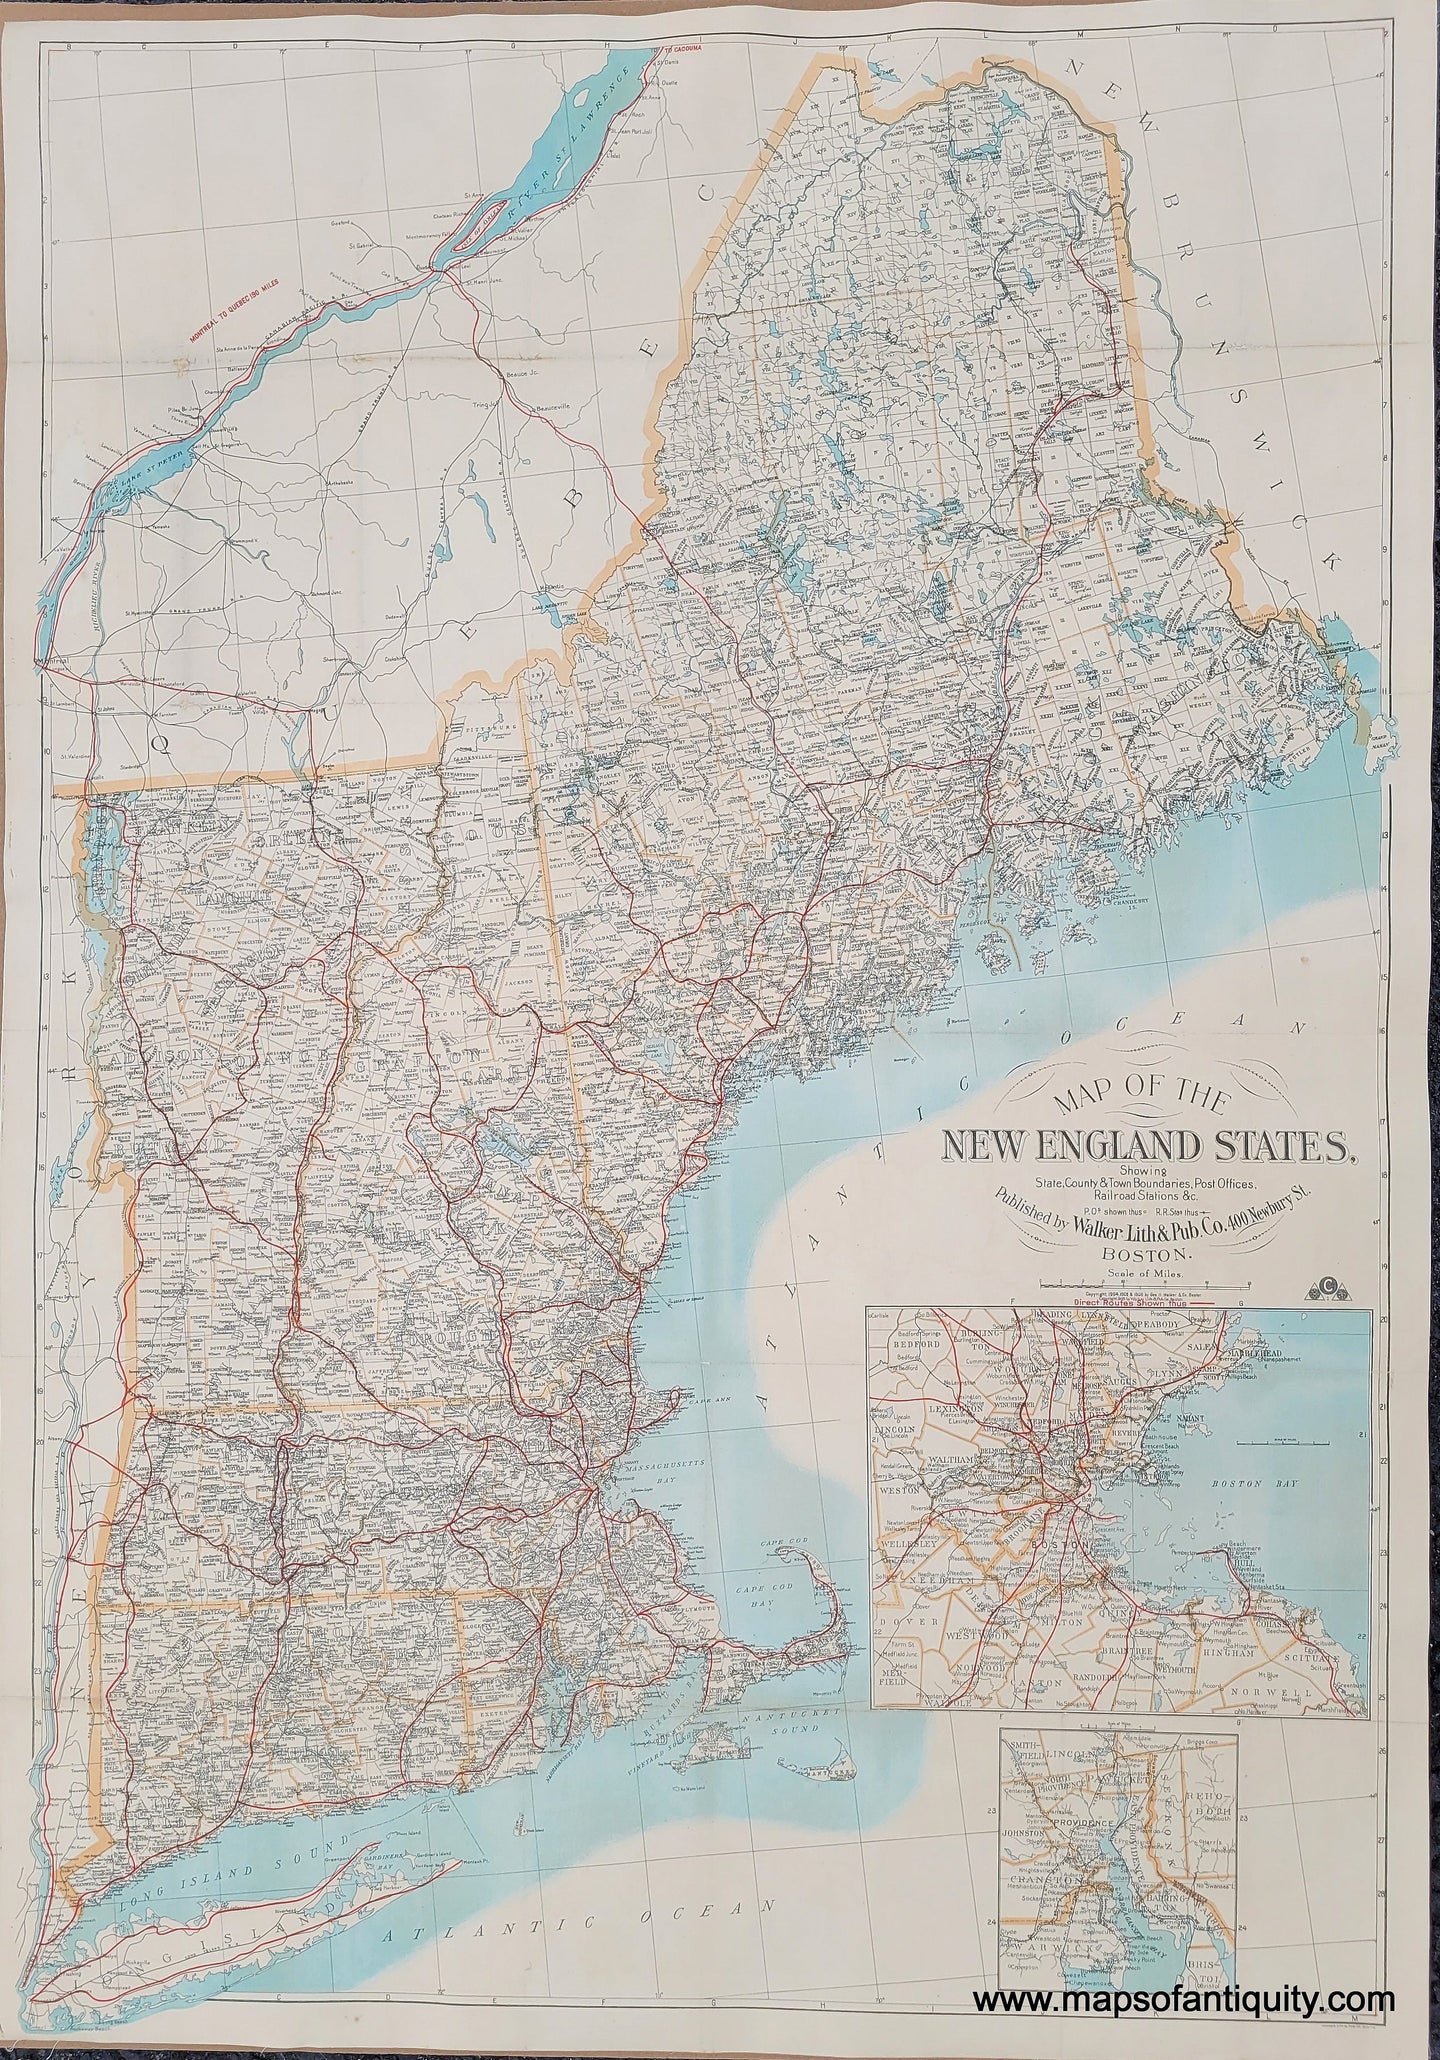 Genuine-Antique-Map-Map-of-the-New-England-States-showing-State-County-Town-Boundaries-Post-Offices-Railroad-Stations-1909-Walker-Maps-Of-Antiquity